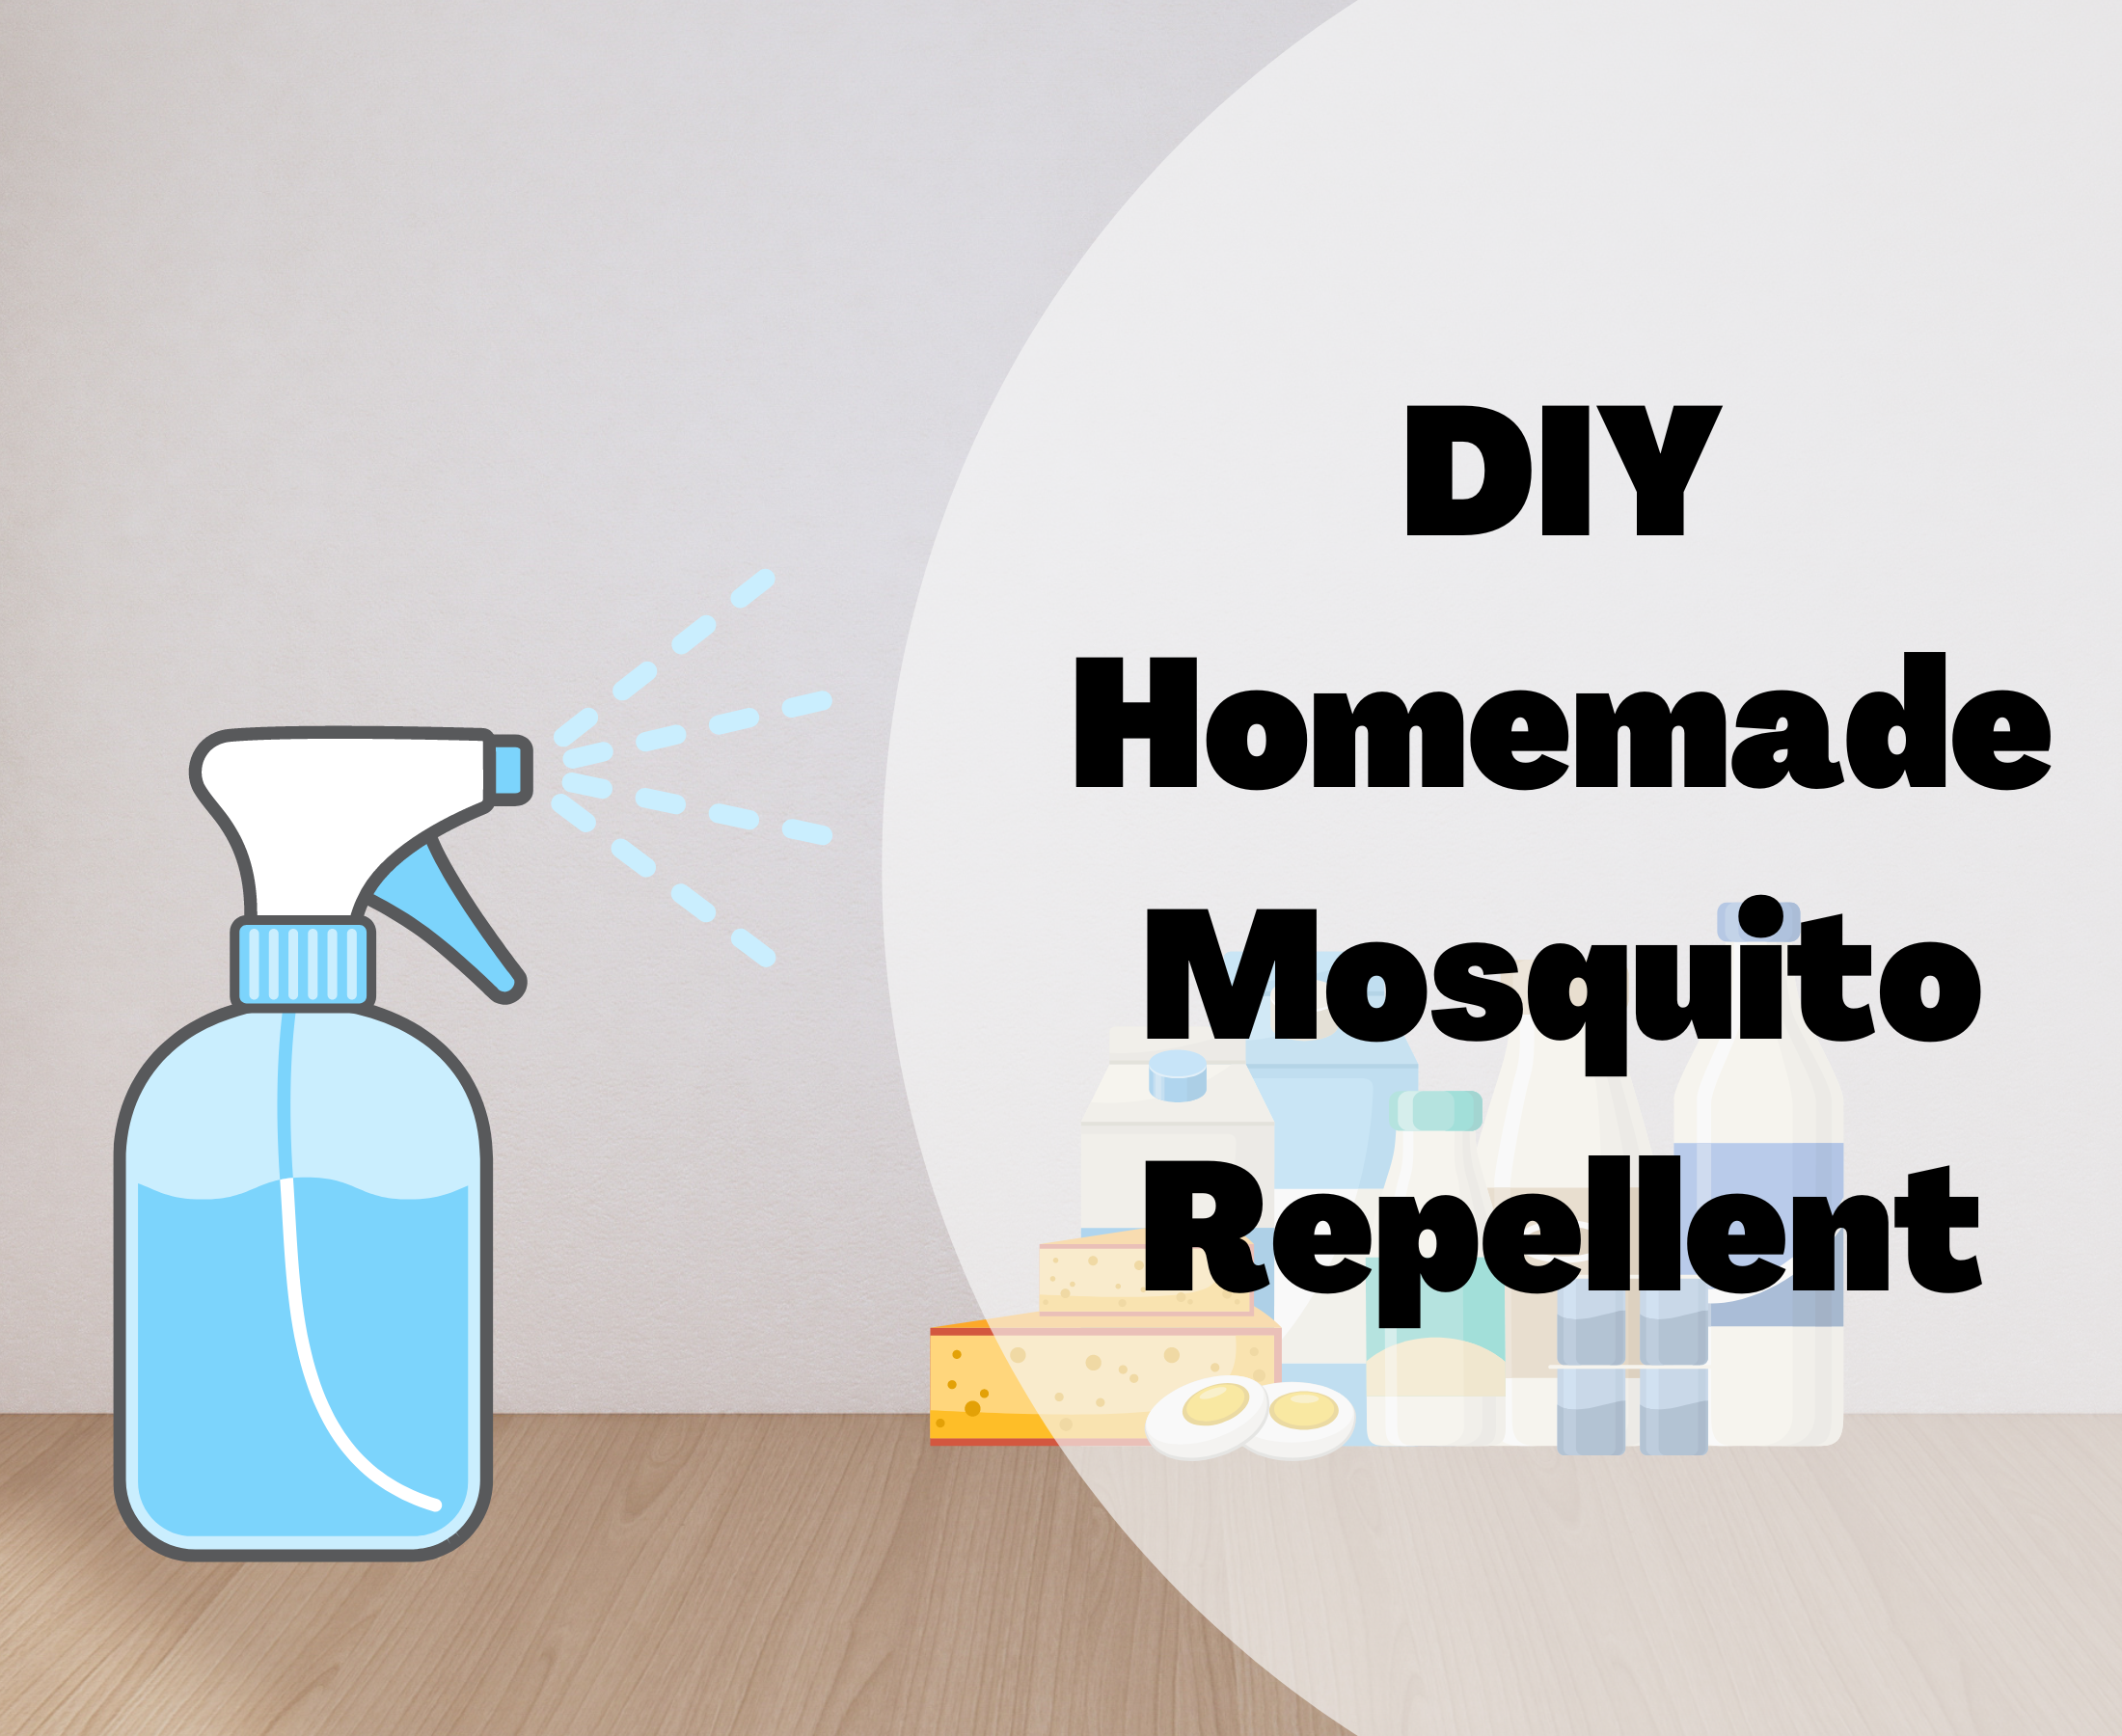 How to make the best homemade mosquito repellent?